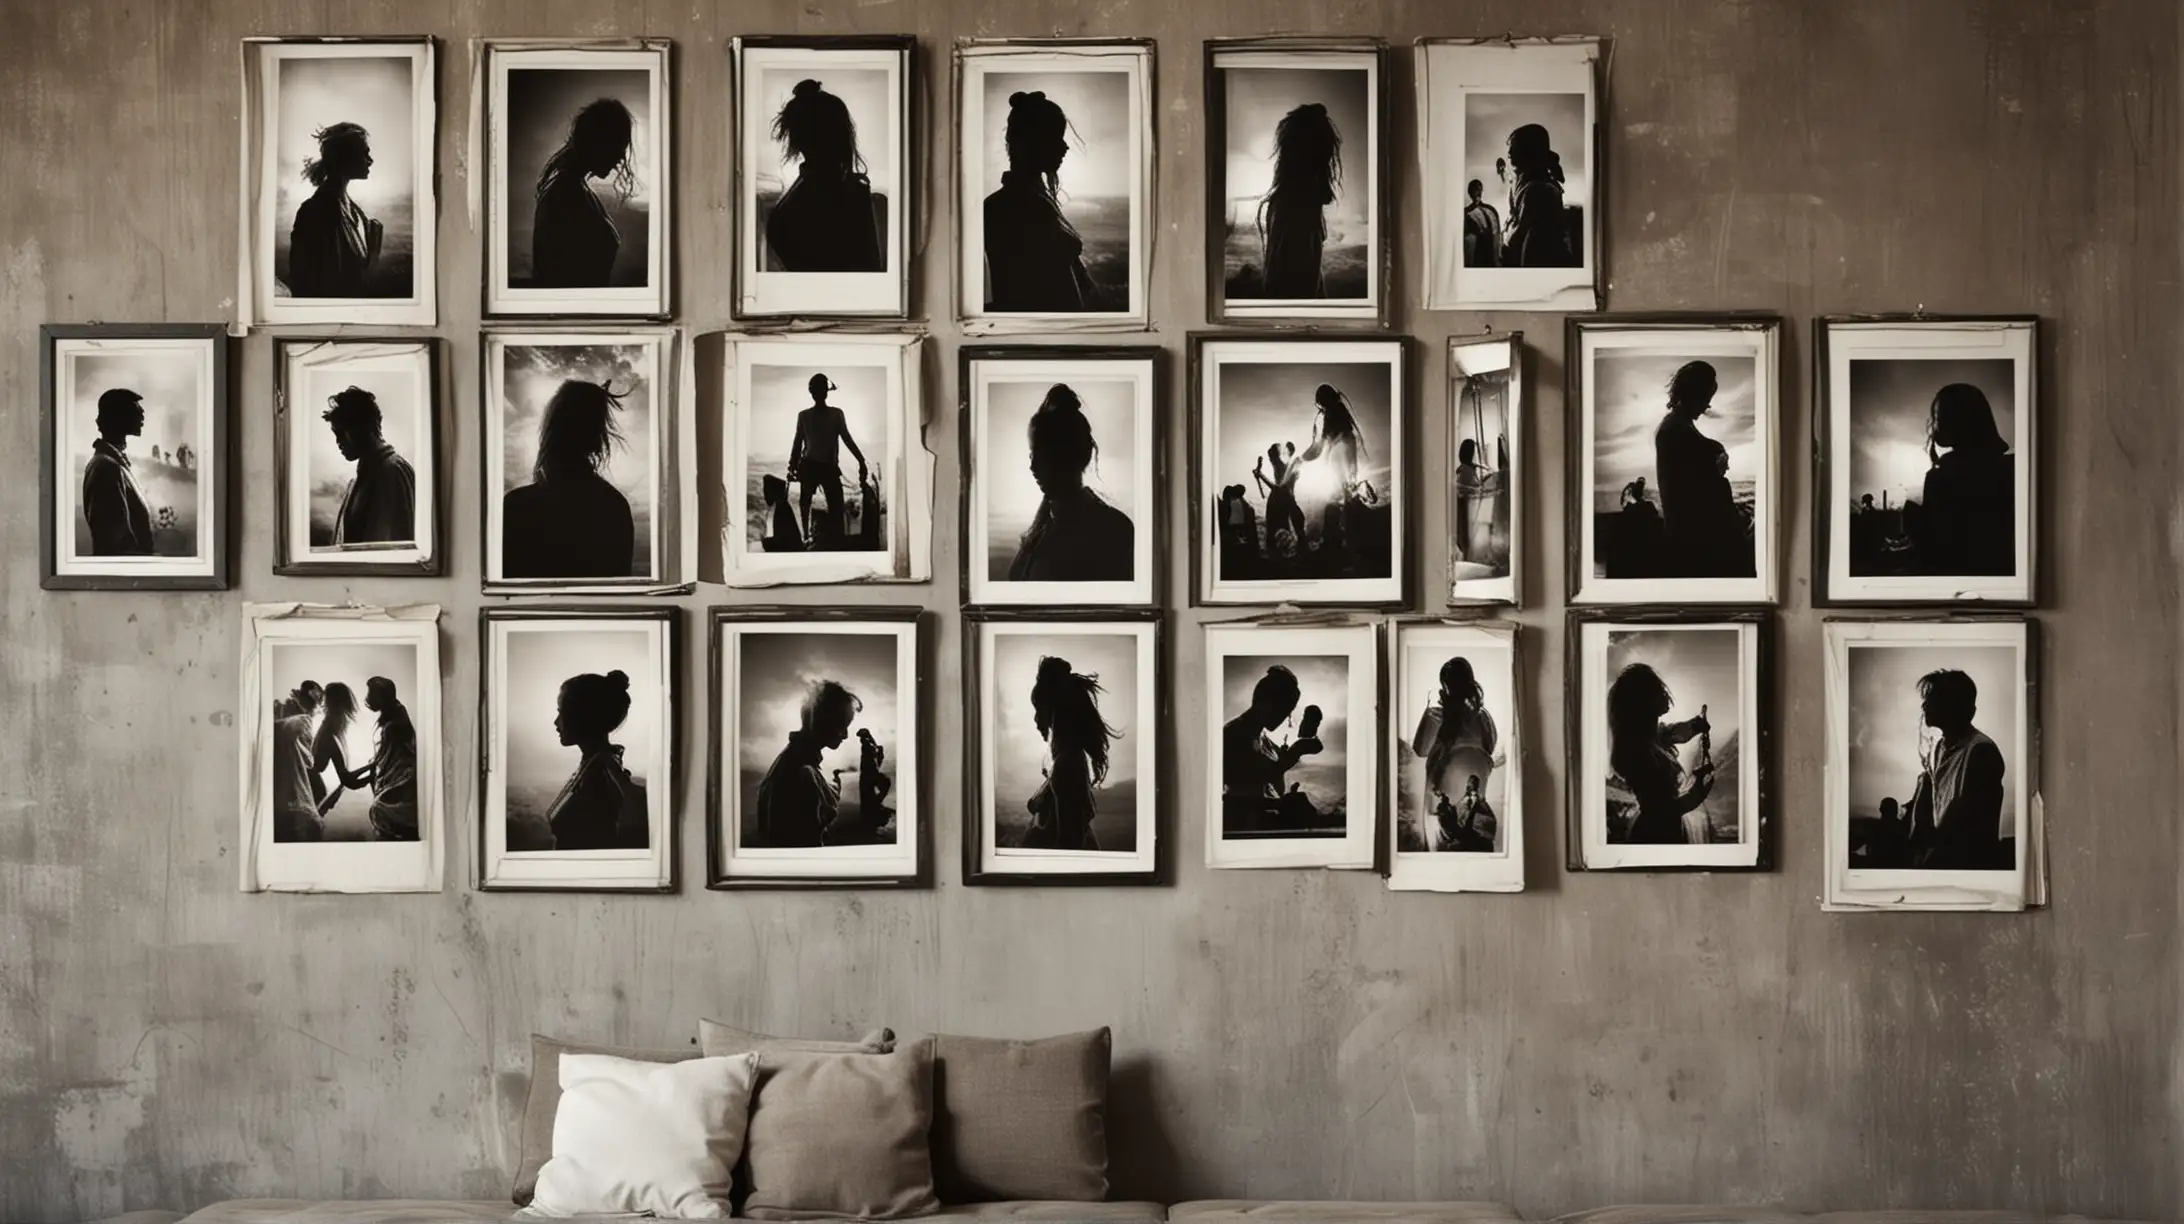 Generate an image of a photo gallery on a wall, there should be silhouettes of people in the images. The photos should be pinned on a board. Should have a clean modern look.